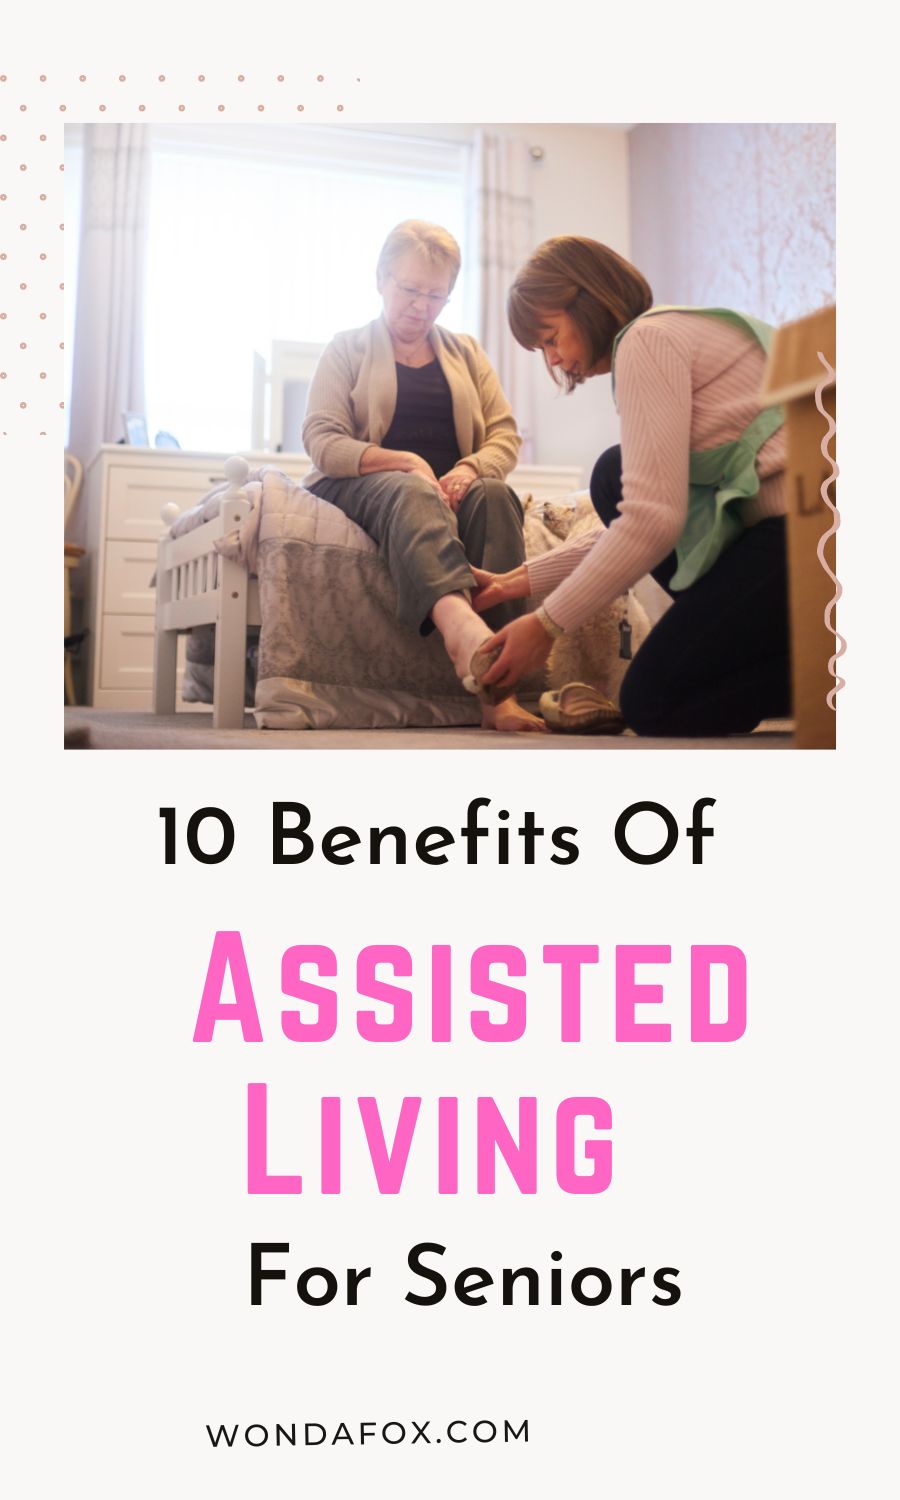 10 benefits of assisted living for seniors